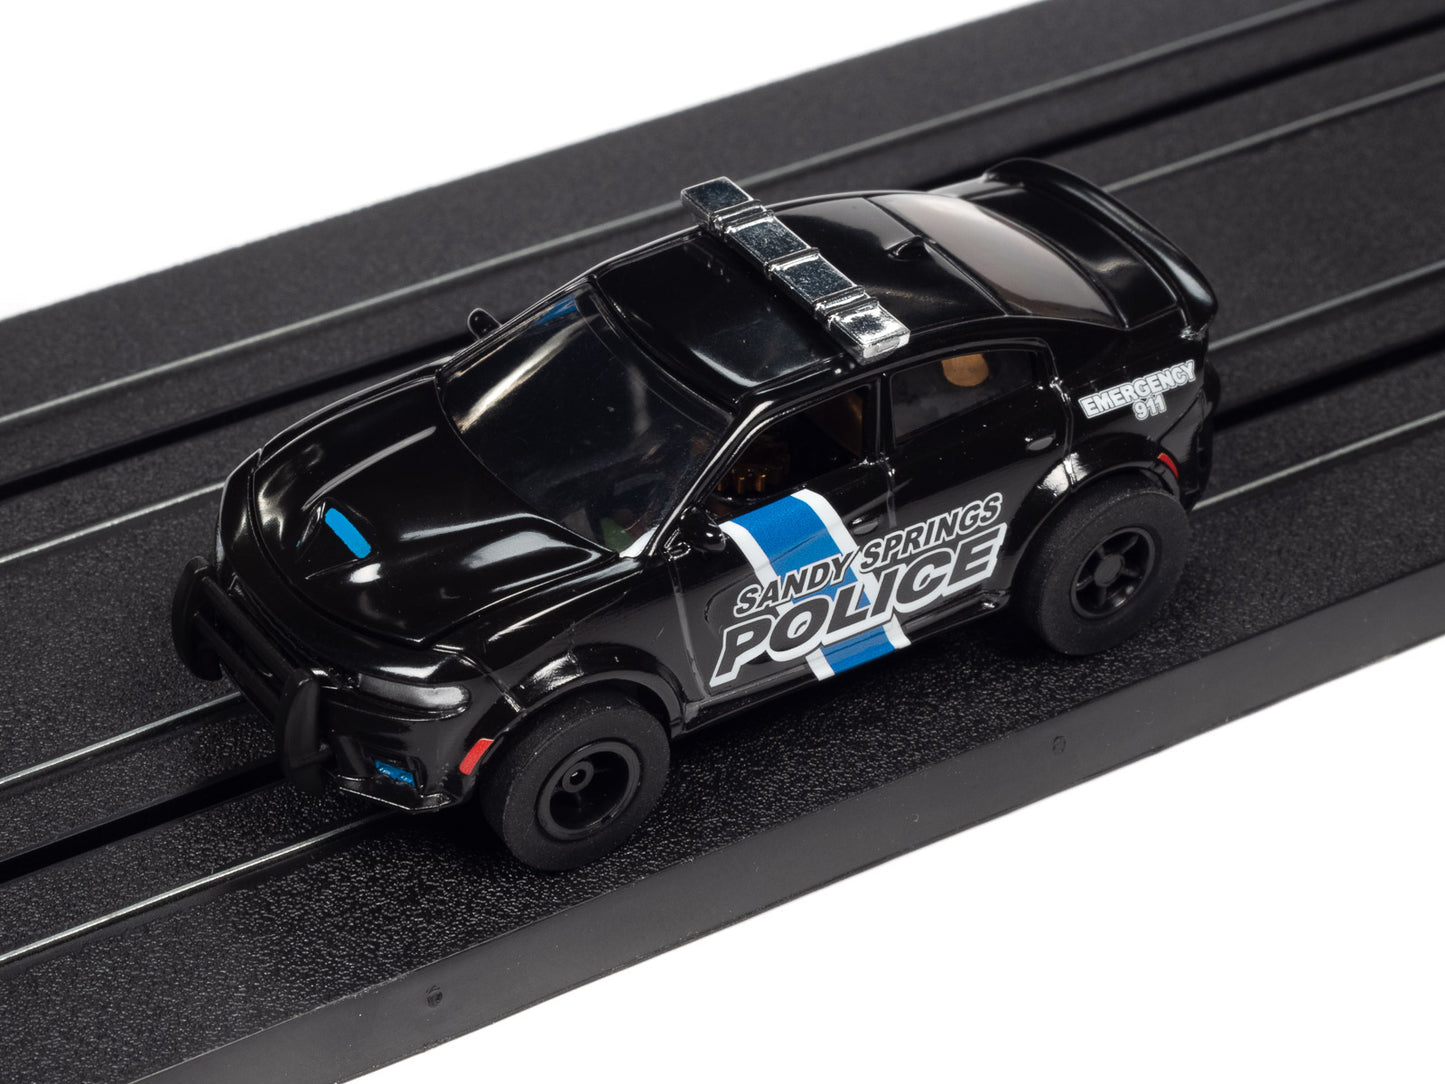 2021 Dodge Charger SRT Sandy Springs Police, H.O. Scale Slot Car, Xtraction Chassis